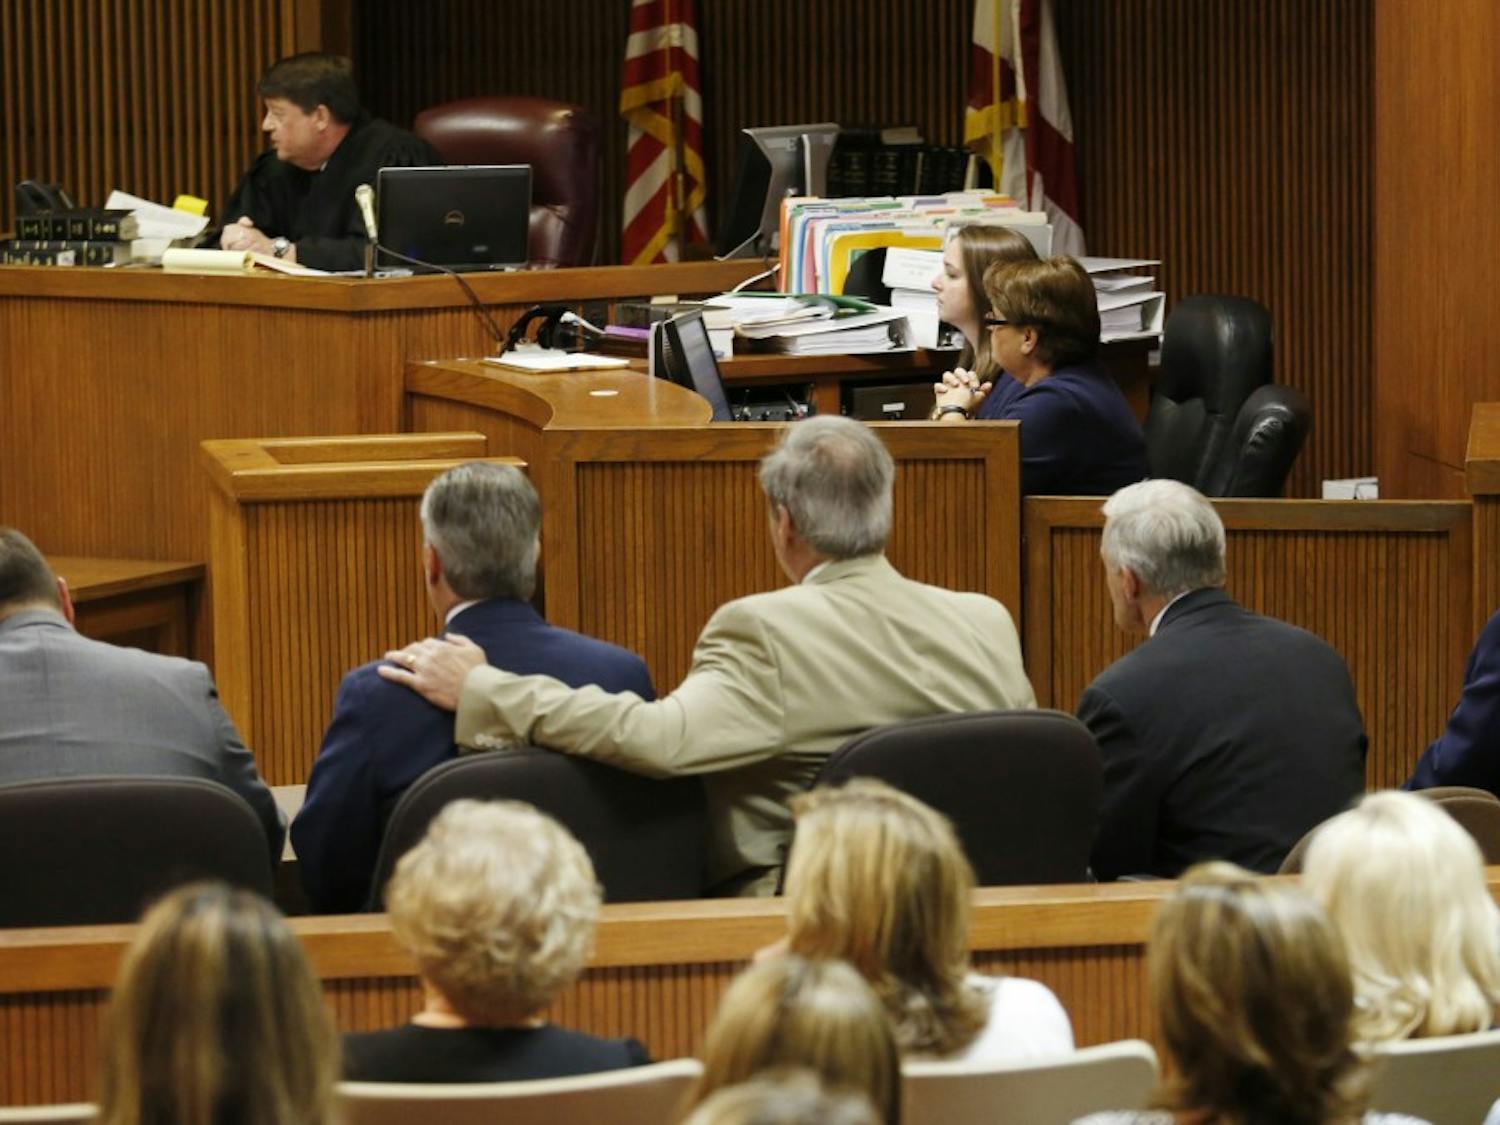 Mike Hubbard sits in the middle while attorney David McKnight has his arm around his shoulder after the Alabama Speaker Mike Hubbard Trial on Friday, June 10, 2016  in Opelika, Ala.
Todd J. Van Emst/Opelika-Auburn News/Pool